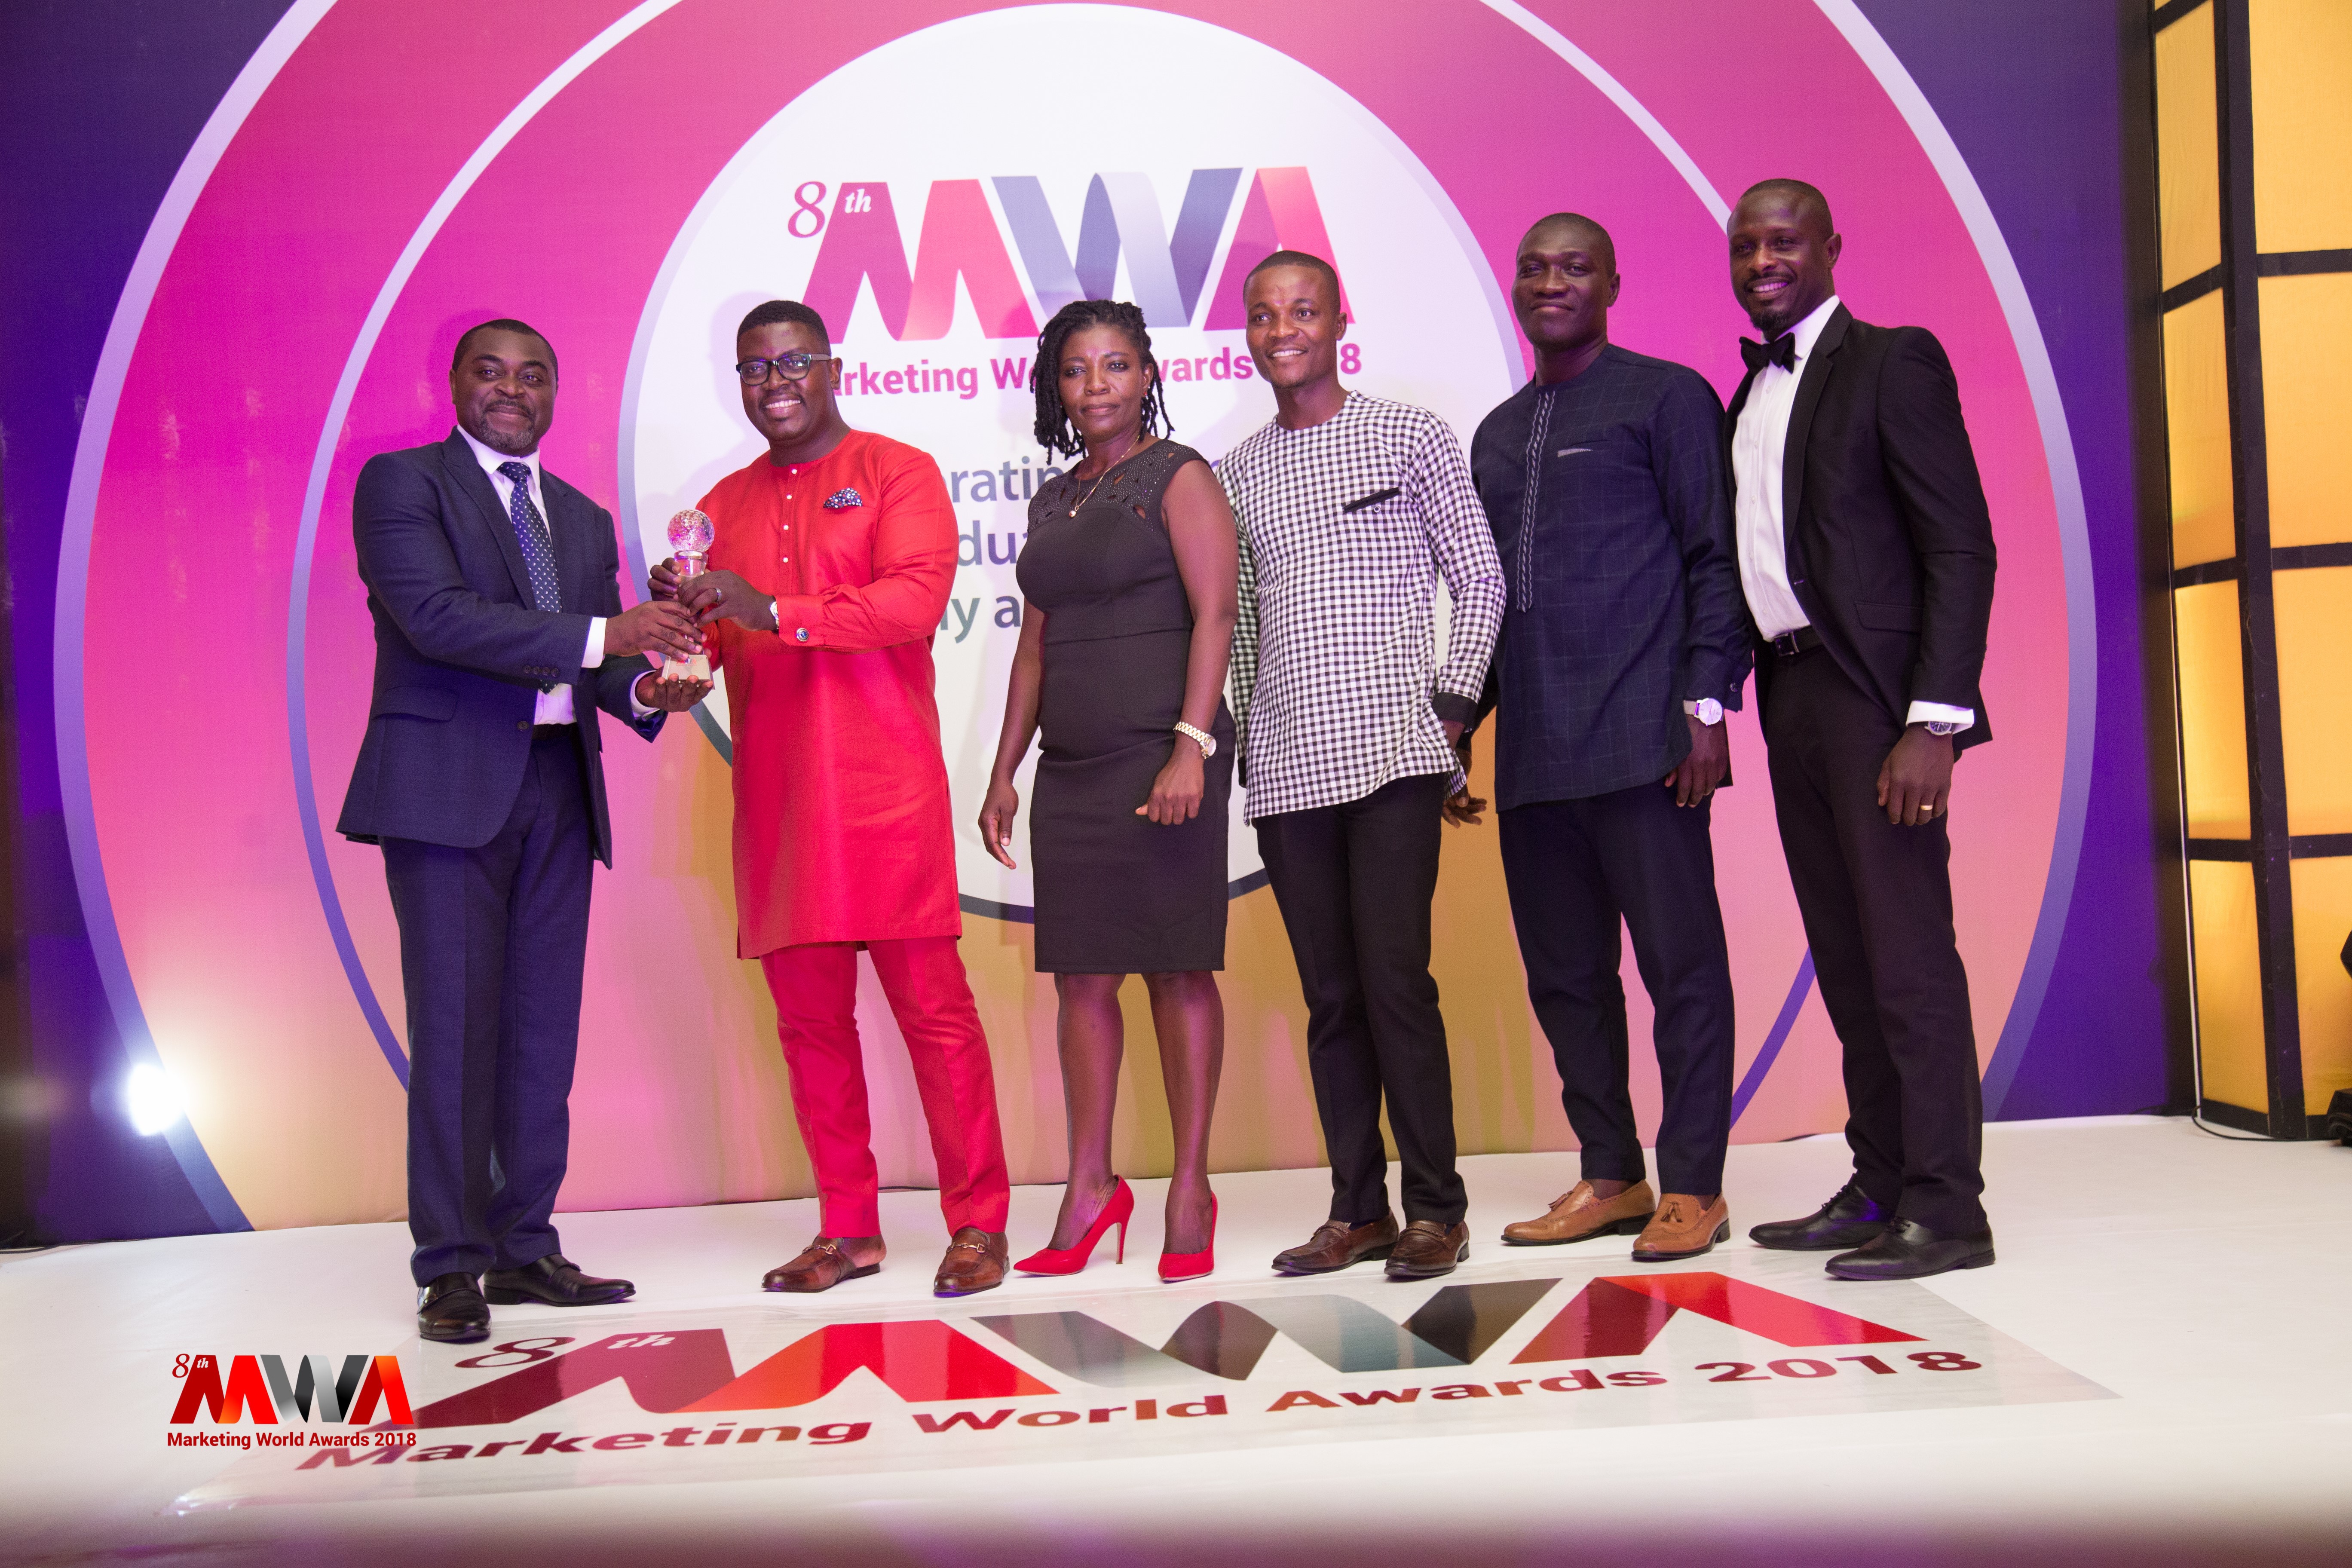 Akin Naphtal (L),CEO of InstinctWave, giving award to Andrew Ackah (R), CEO of Dentsu Aegis Network Ghana.